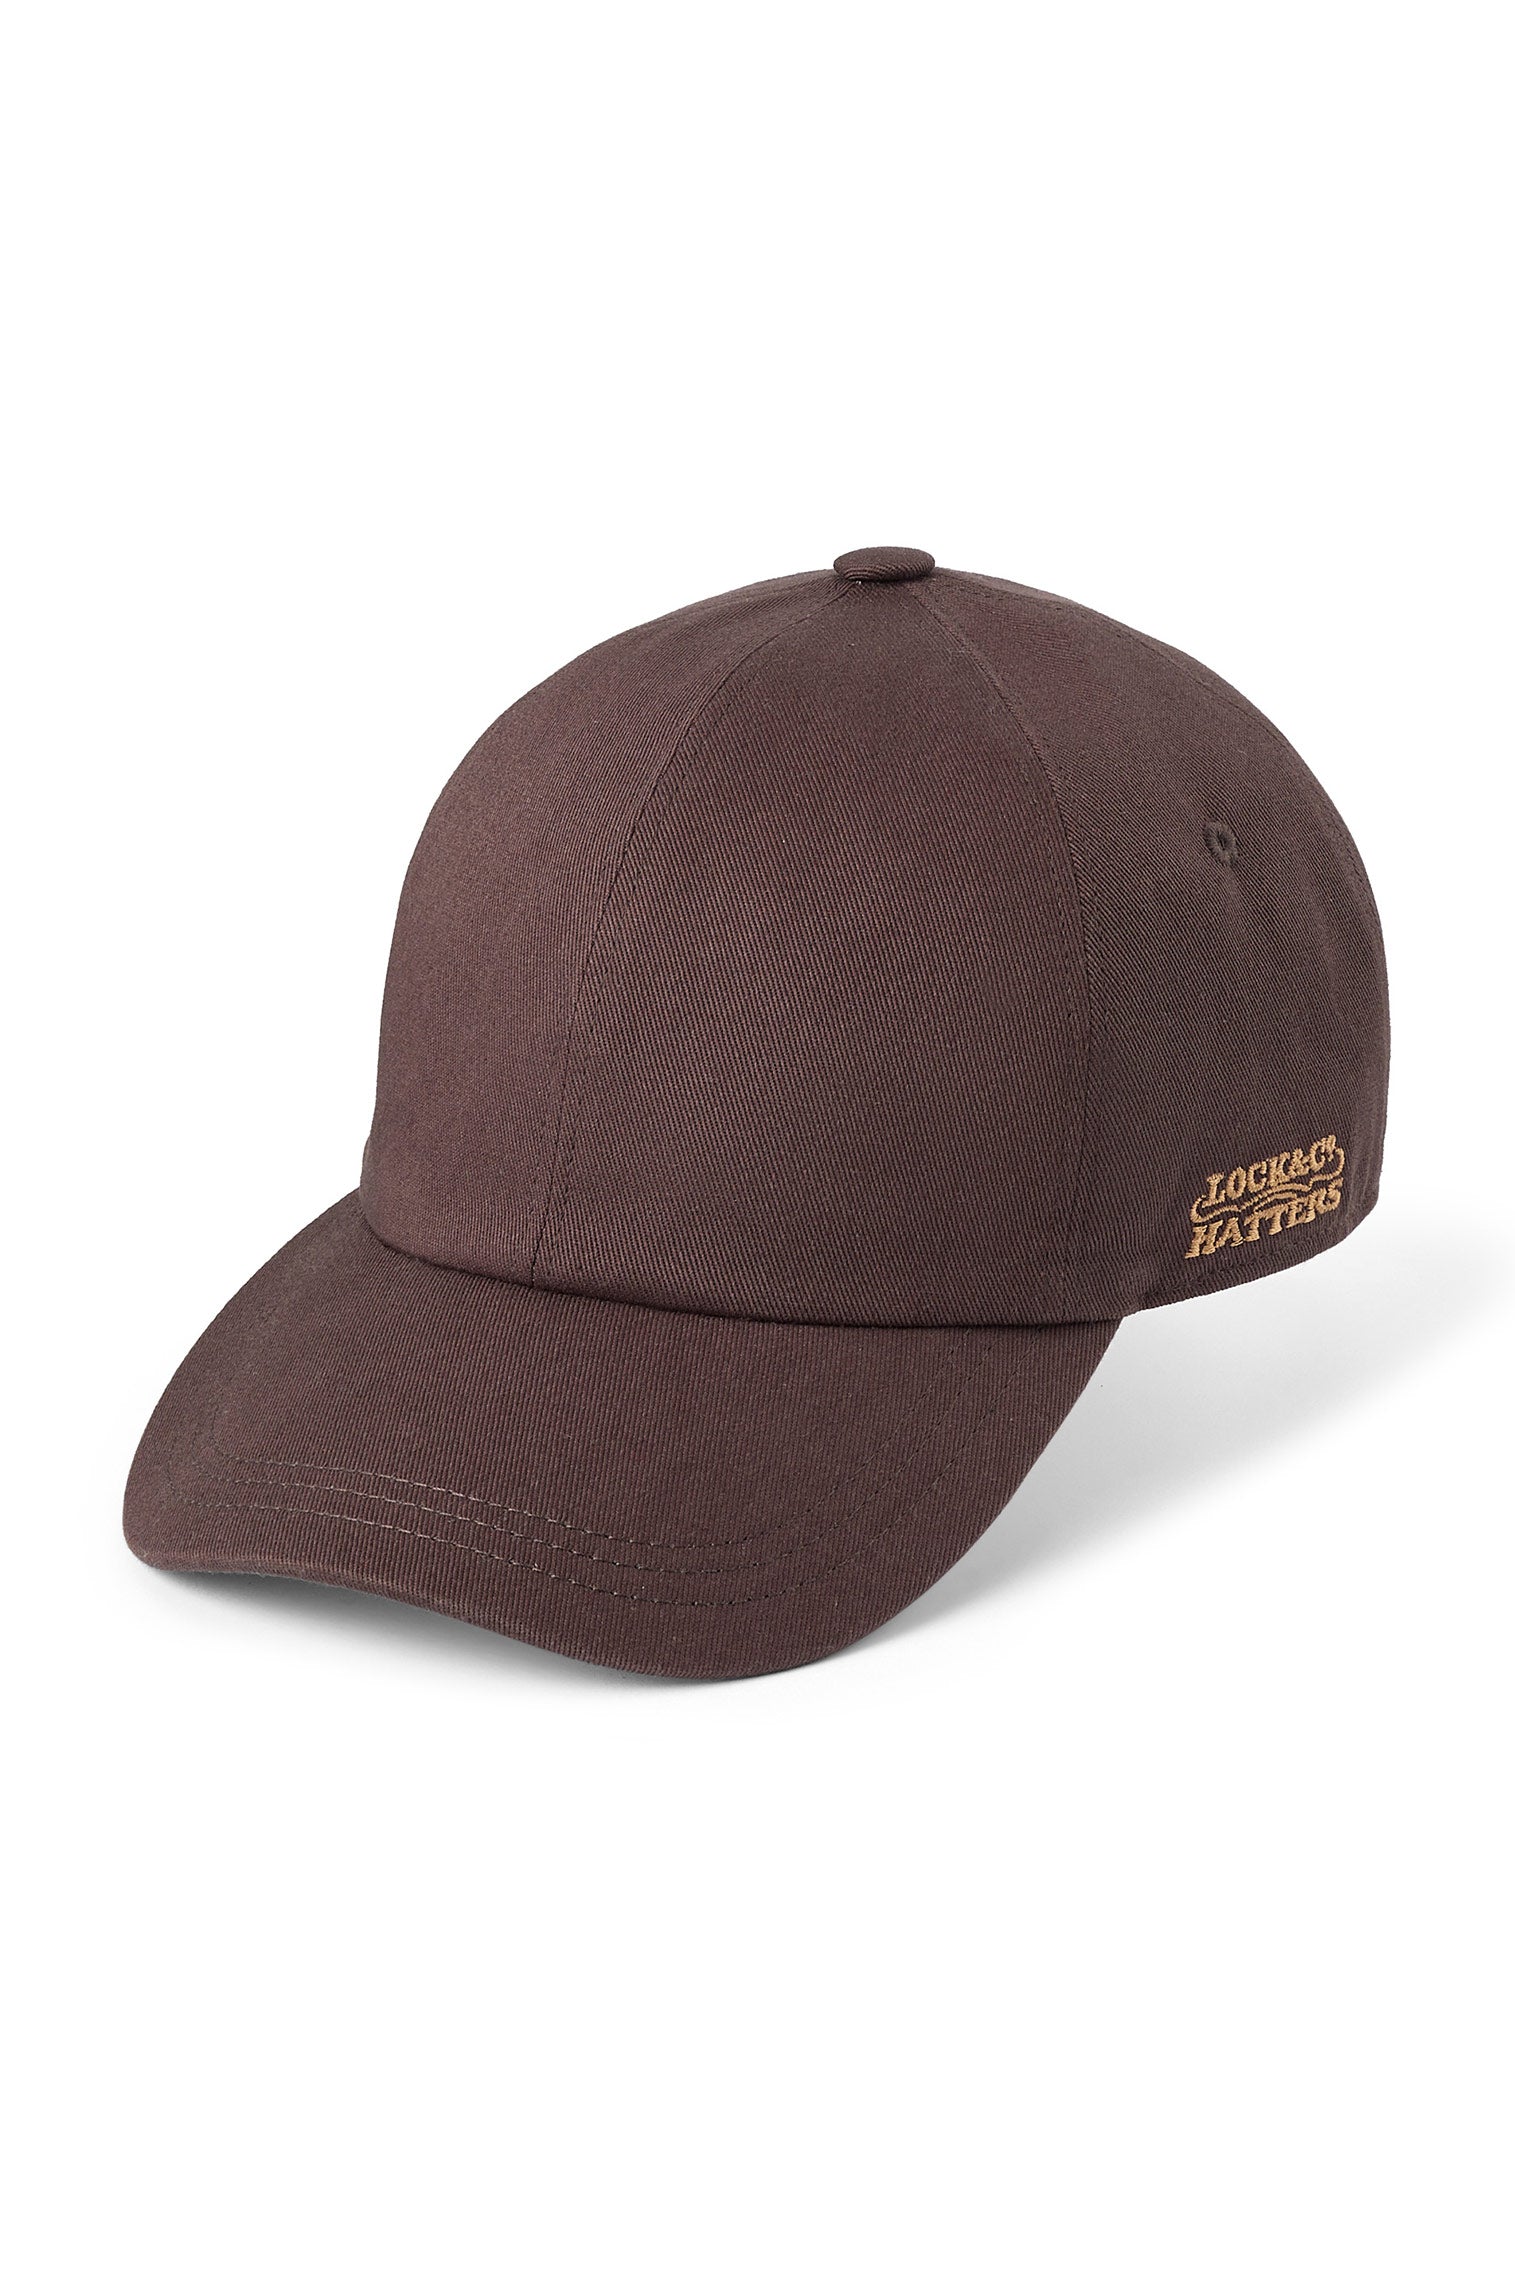 Adjustable Brown Baseball Cap - Products - Lock & Co. Hatters London UK